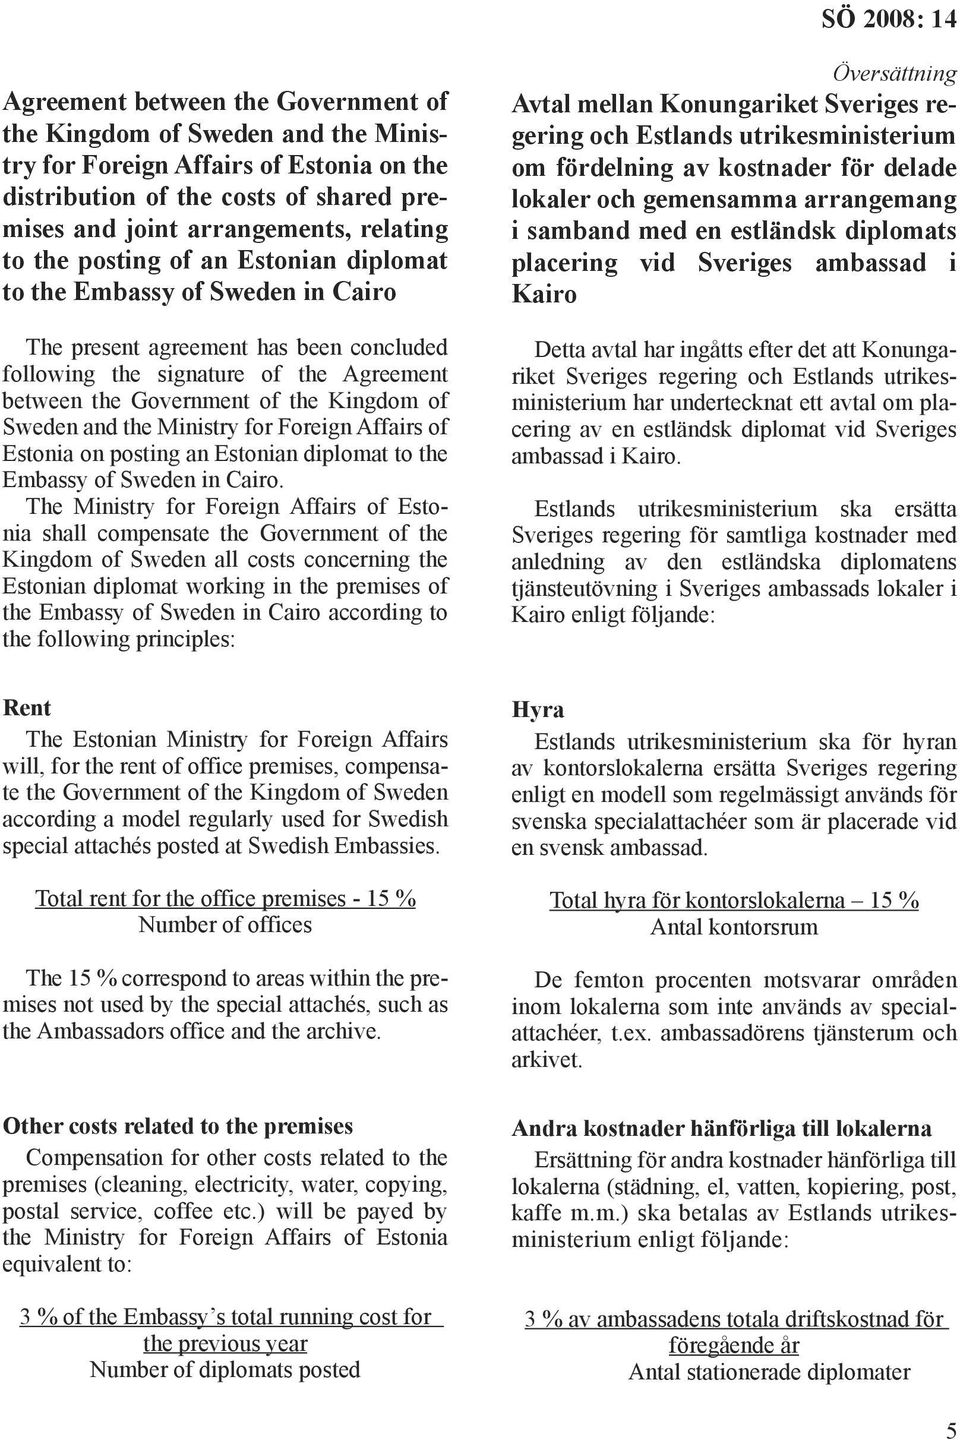 the Ministry for Foreign Affairs of Estonia on posting an Estonian diplomat to the Embassy of Sweden in Cairo.